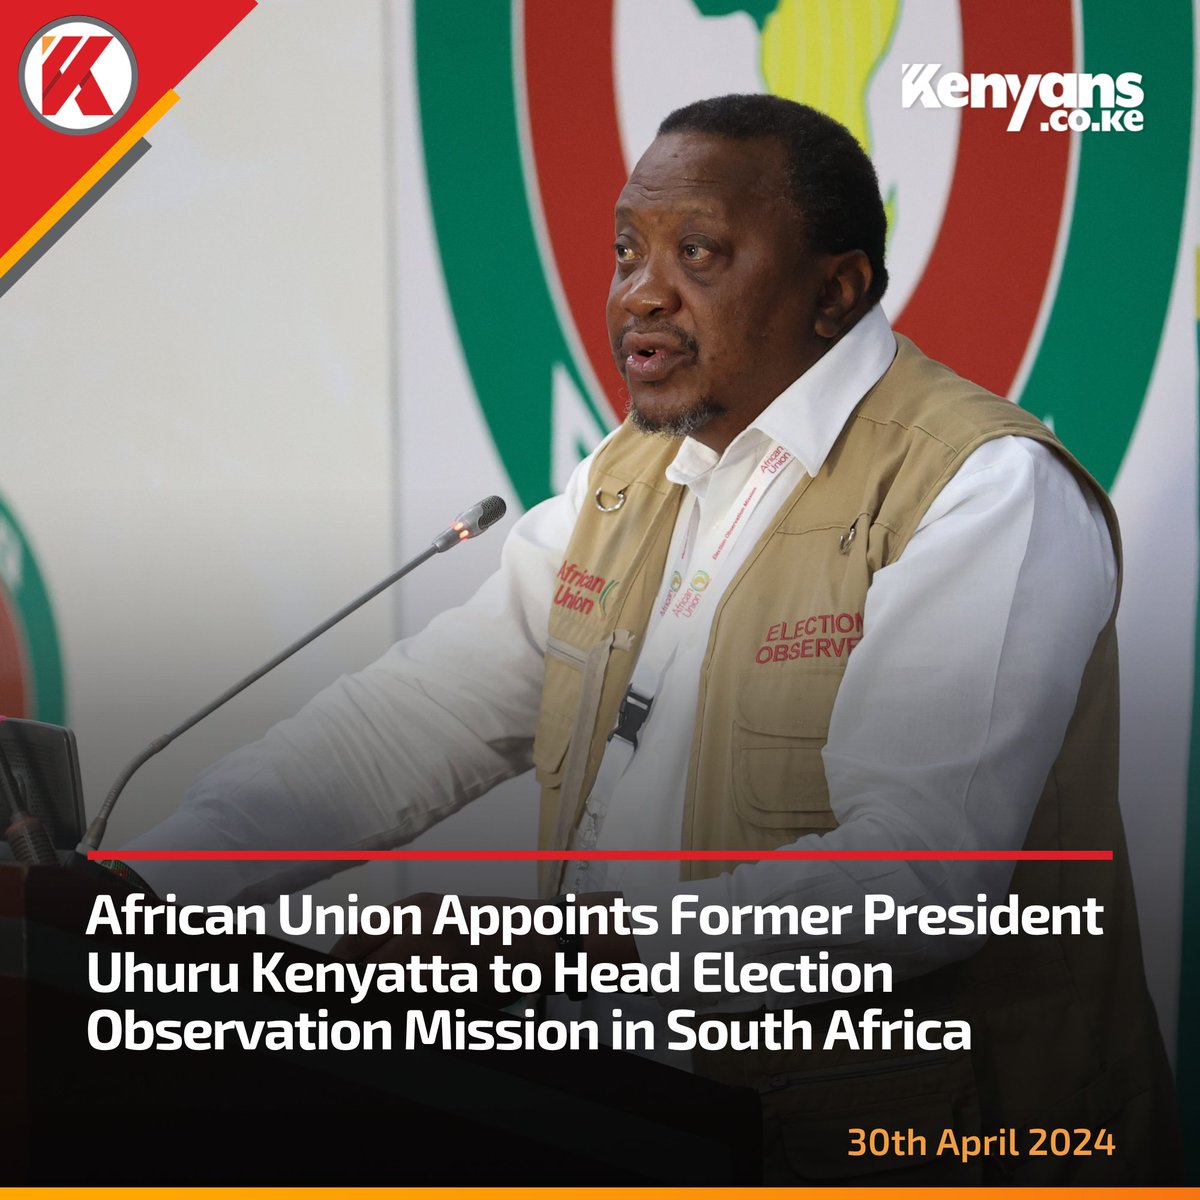 Our President Uhuru Kenyatta has been appointed by AU as the Head of Election Observation Mission in SA.